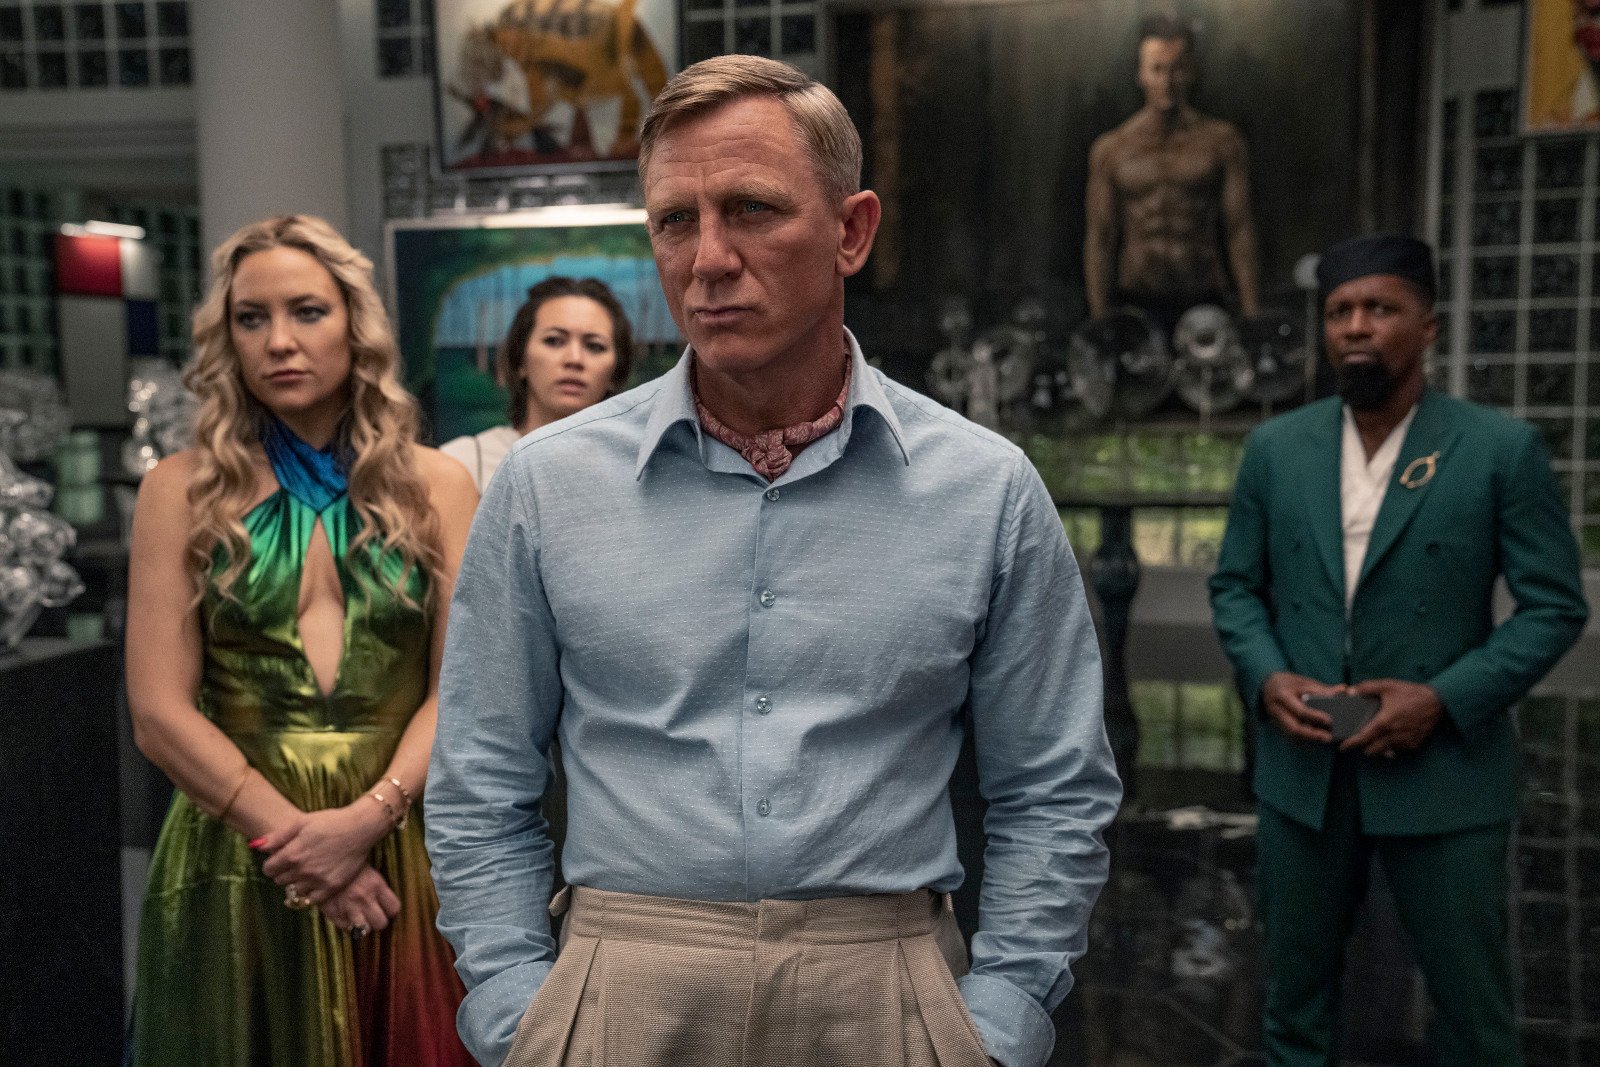 Kate Hudson, Jessica Henwick, Daniel Craig, and Leslie Odom Jr. in 'Glass Onion' for our article covering its ending. Craig is standing in front of the others, and they're staring at someone off-screen.